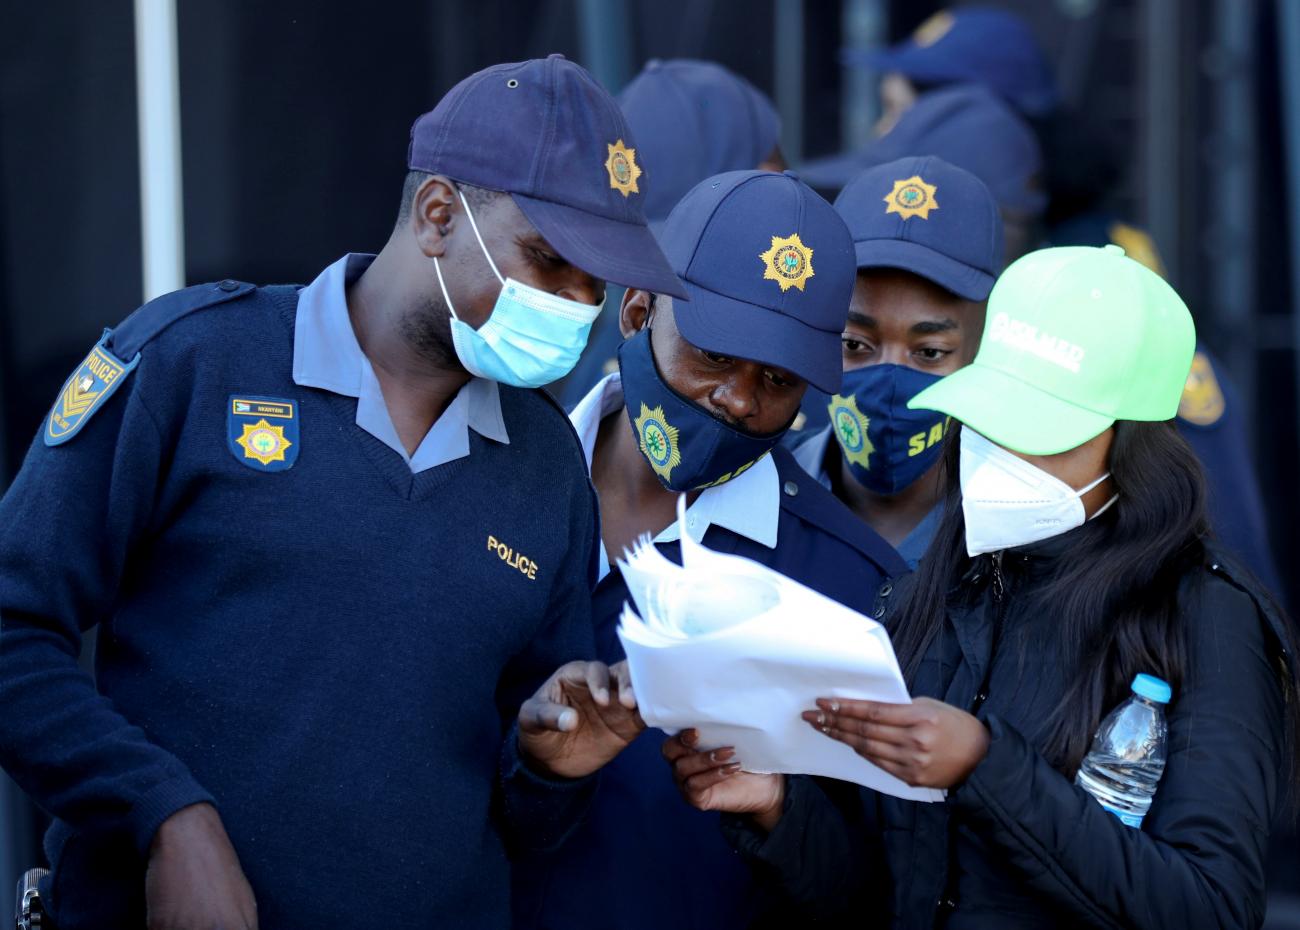 Members of the South African Police Service (SAPS) check their names on a list while waiting to receive a COVID vaccine—part of a vaccine rollout to over 180,000 SAPS members, in Soweto, South Africa on July 5, 2021. 